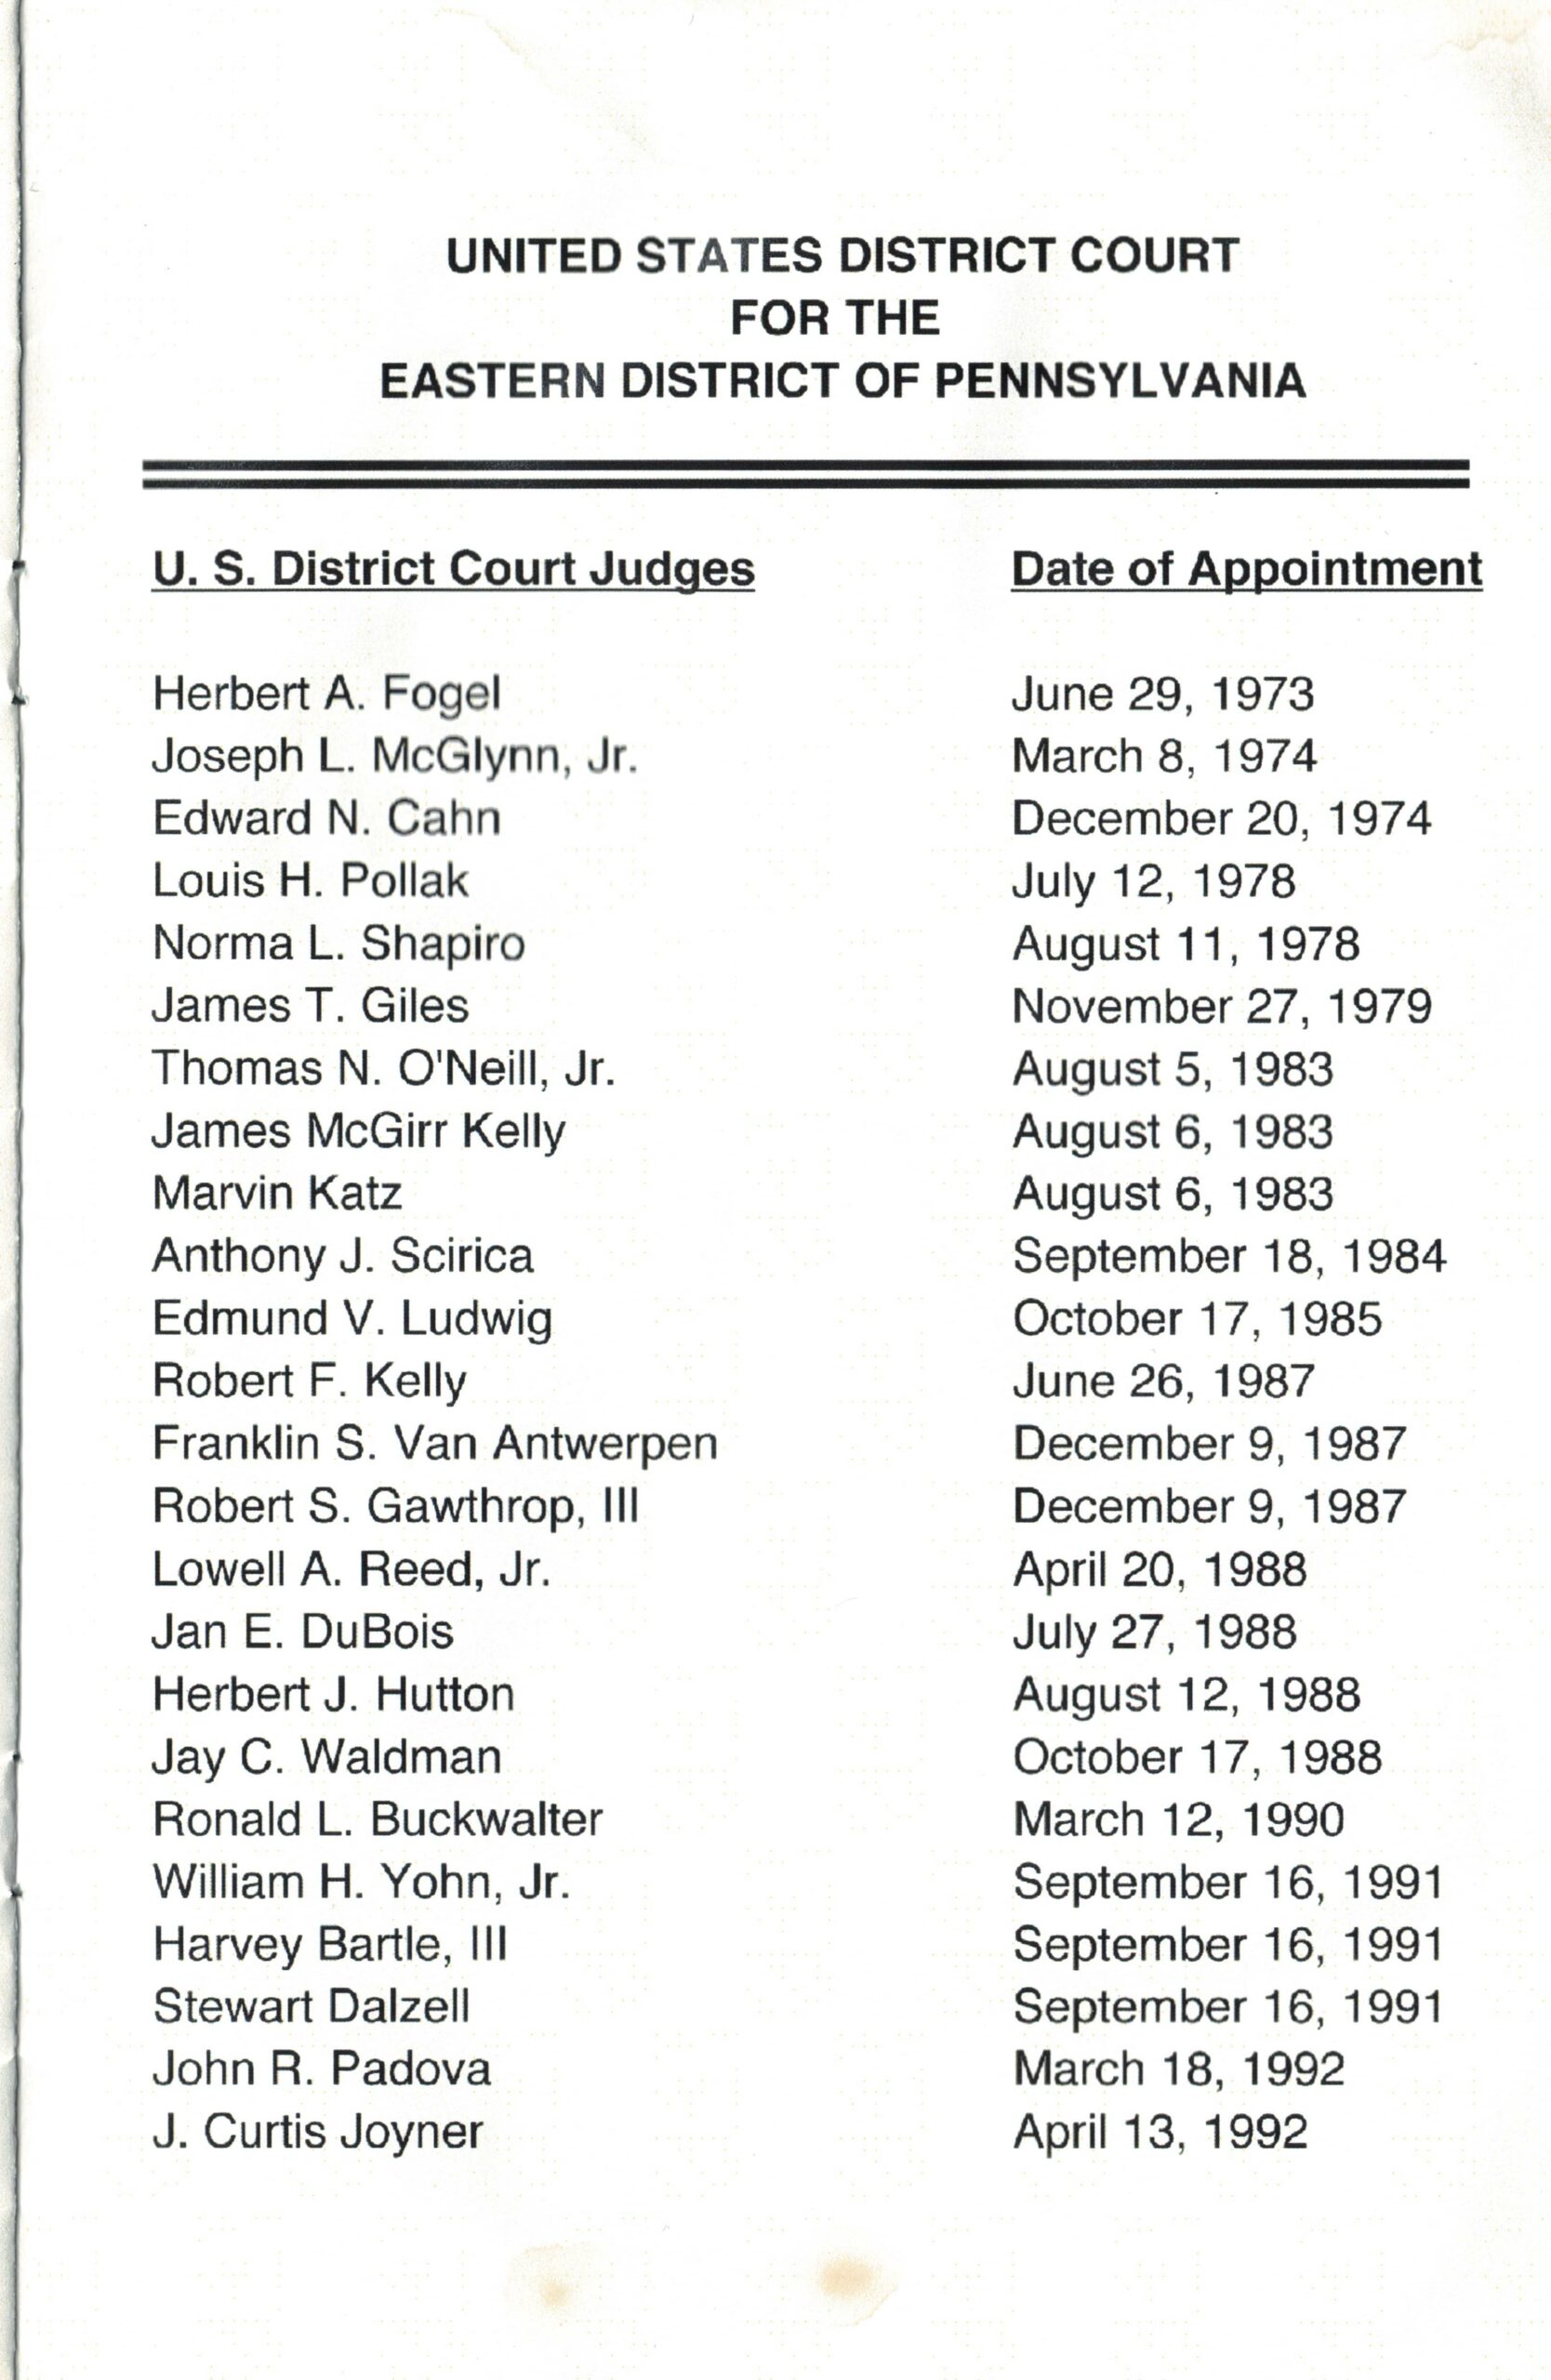 Thirteenth page of the Jones program pamphlet with third page of U.S. District Court judges and dates of appointment.